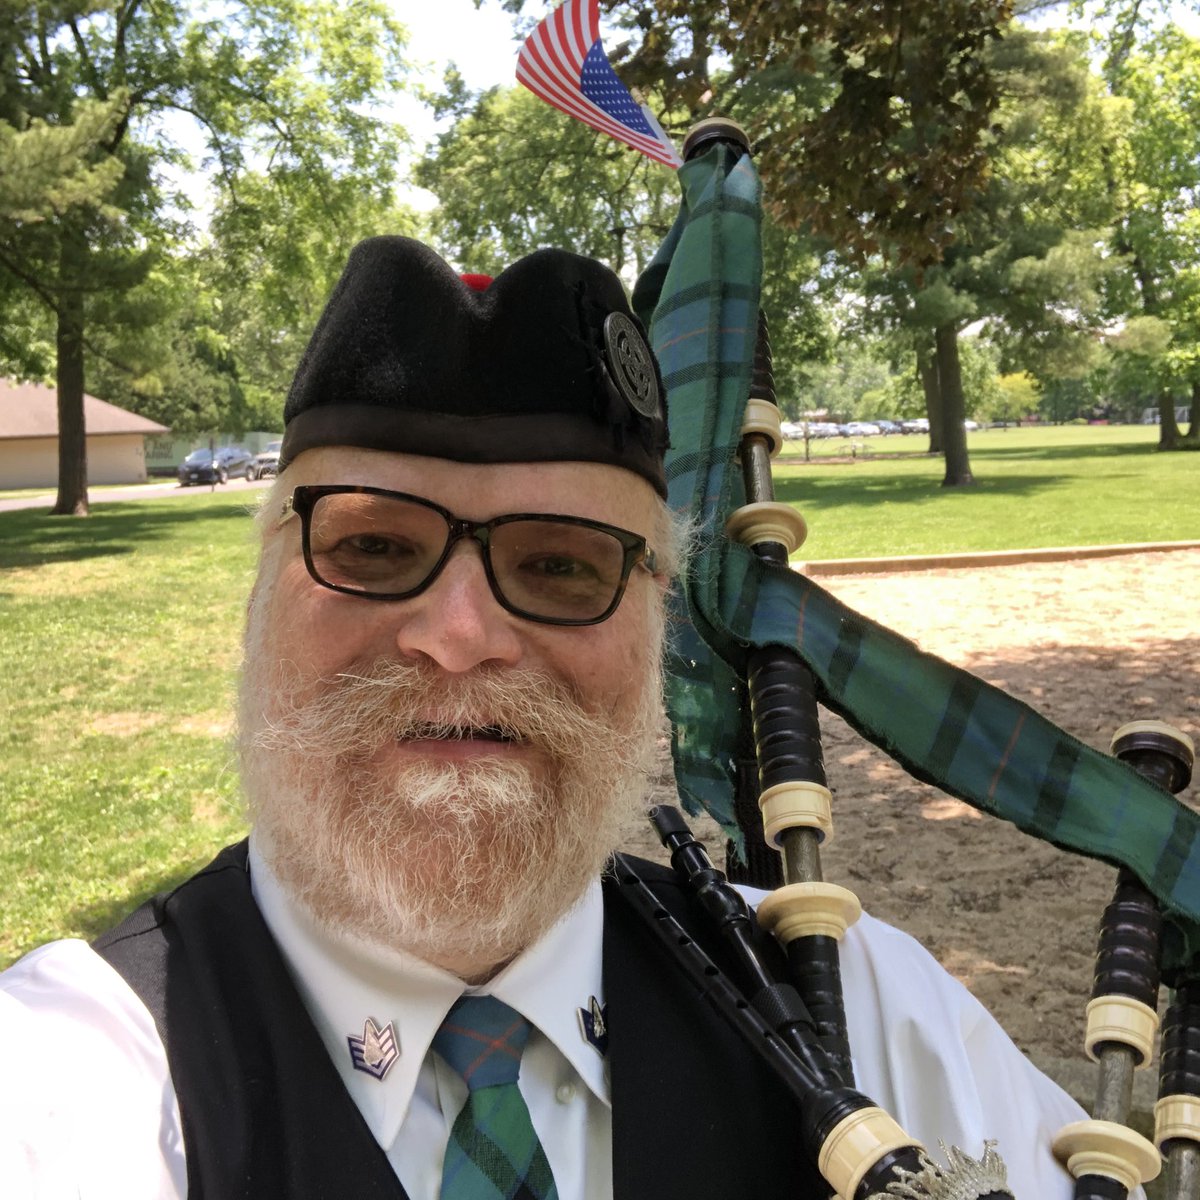 Honored to pipe for the Peoria County Memorial Day ceremony at Glen Oak Park.  #MemorialDay #peoria #illinois #peoriail #peoriaillinois #bagpiper #bagpipes 🇺🇸